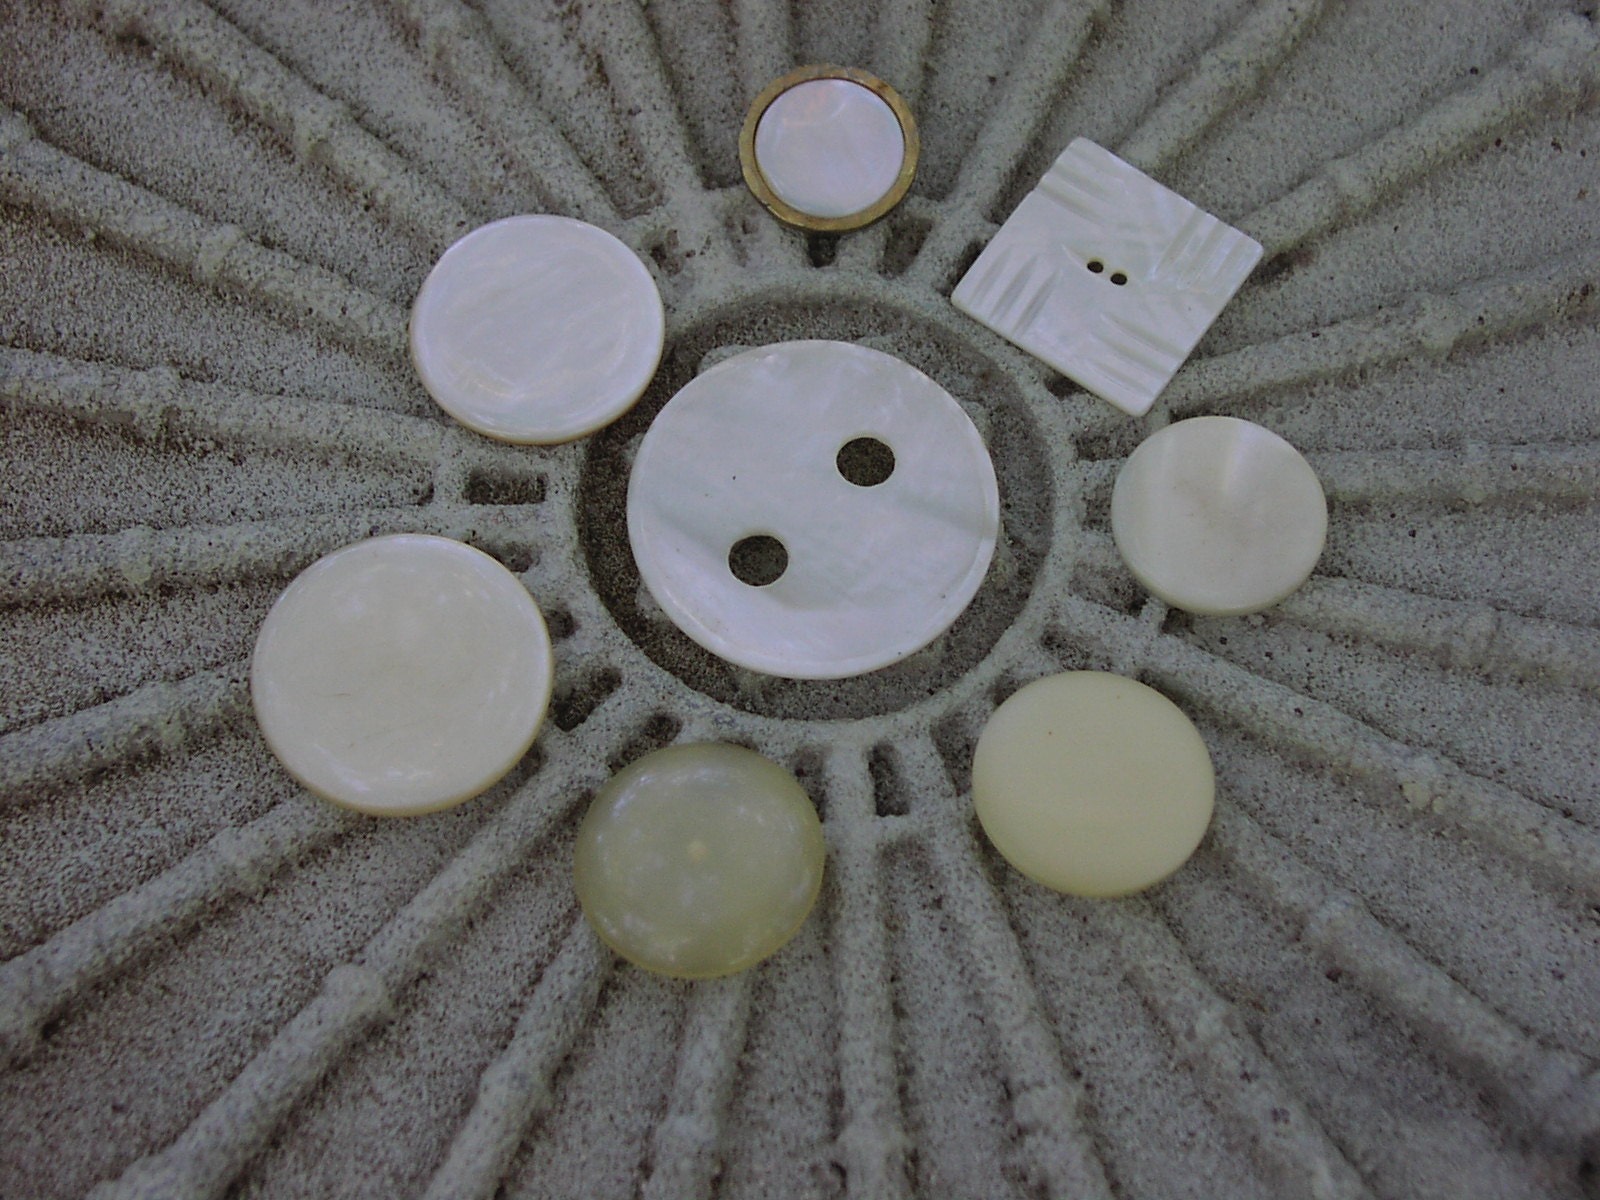 Vintage Buttons, random lot of 8 large flat Mother of Pearl buttons, off white cream colored